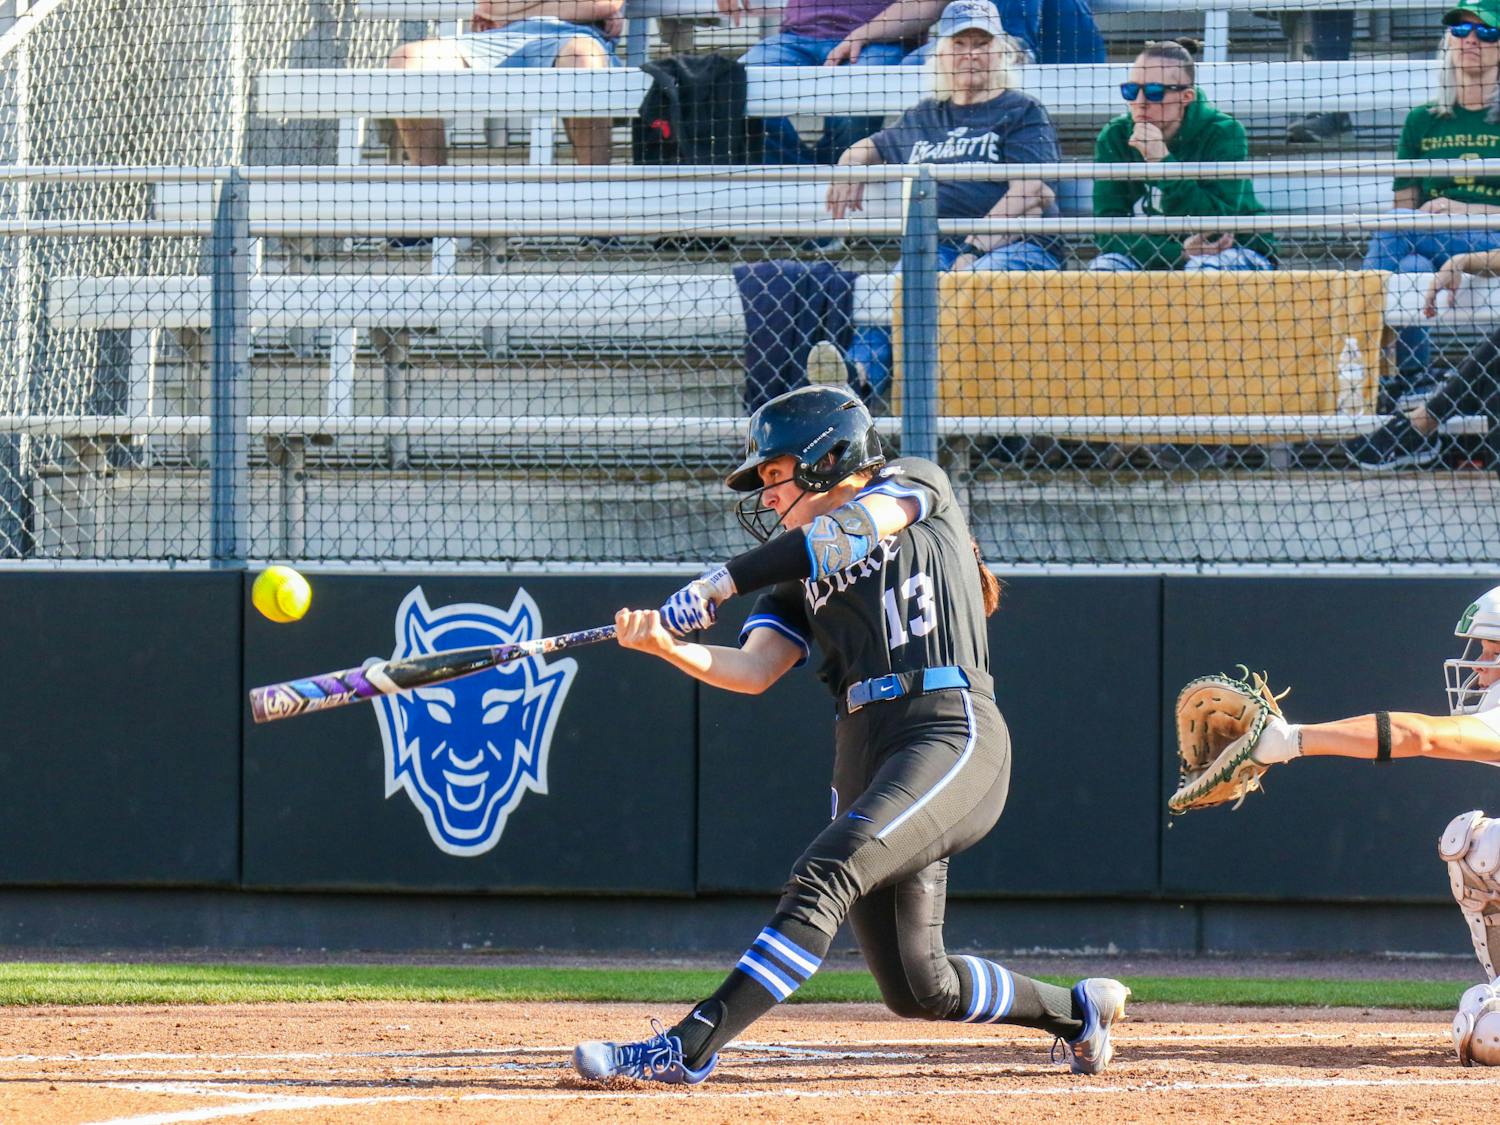 Francesca Frelick launches the ball during Duke's win against Charlotte.